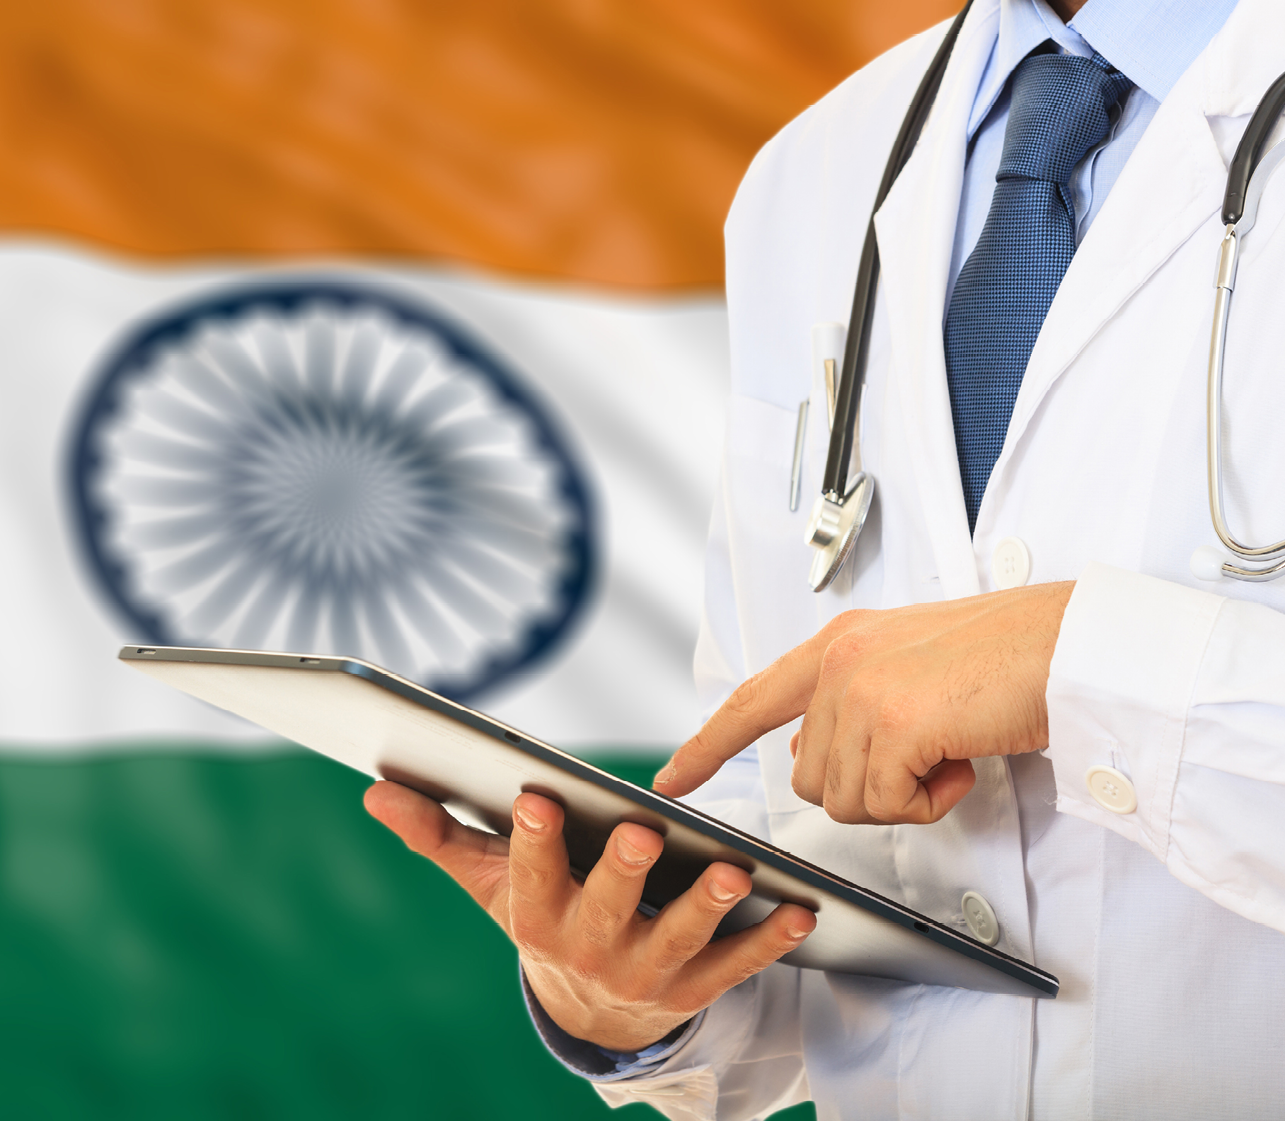 Fime accredited to support adoption of digital healthcare in India.